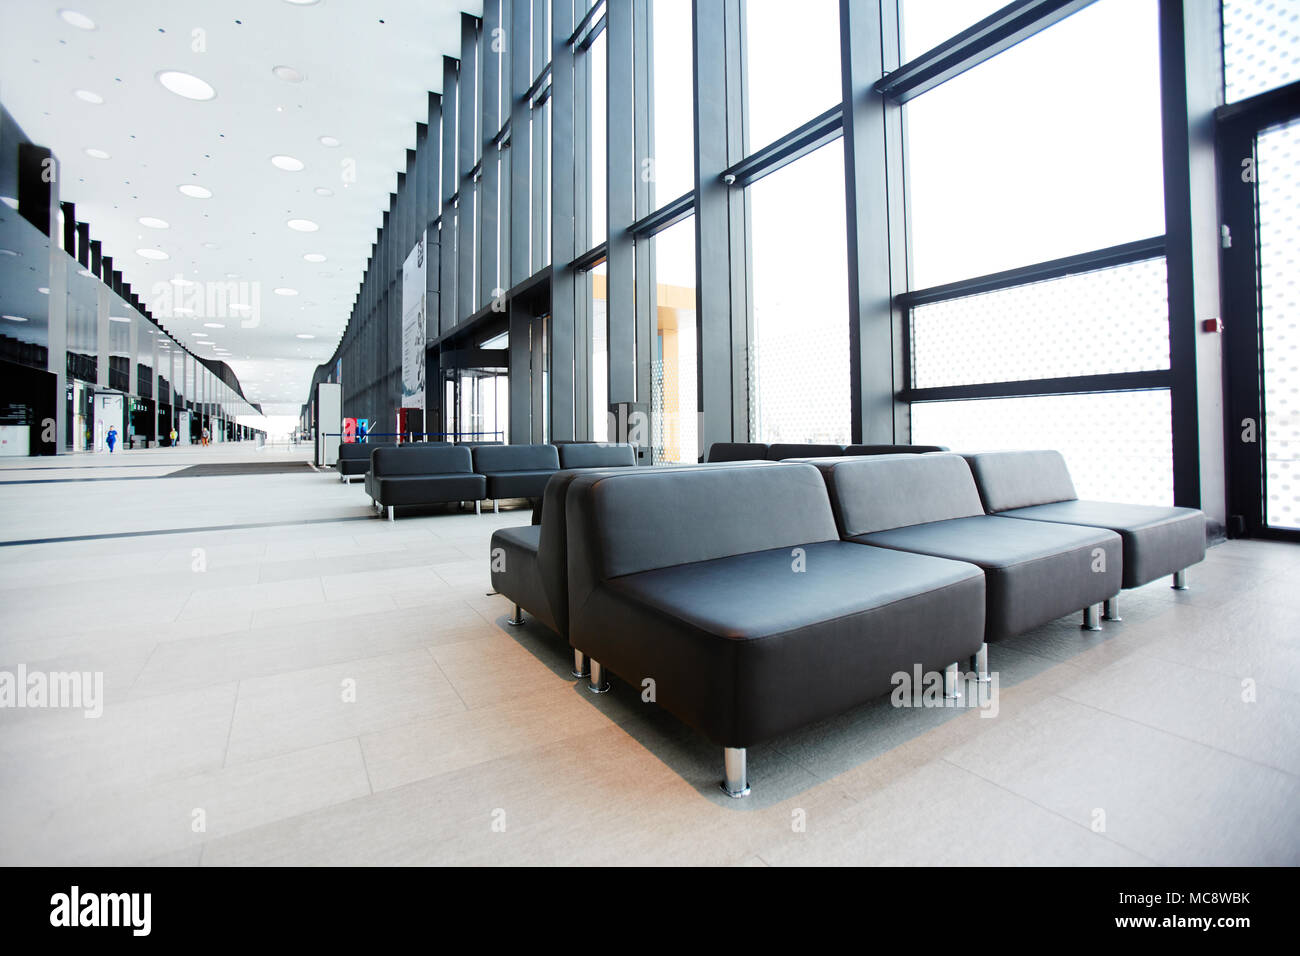 Long aisle inside modern airport lounge with several black leather seats along Stock Photo